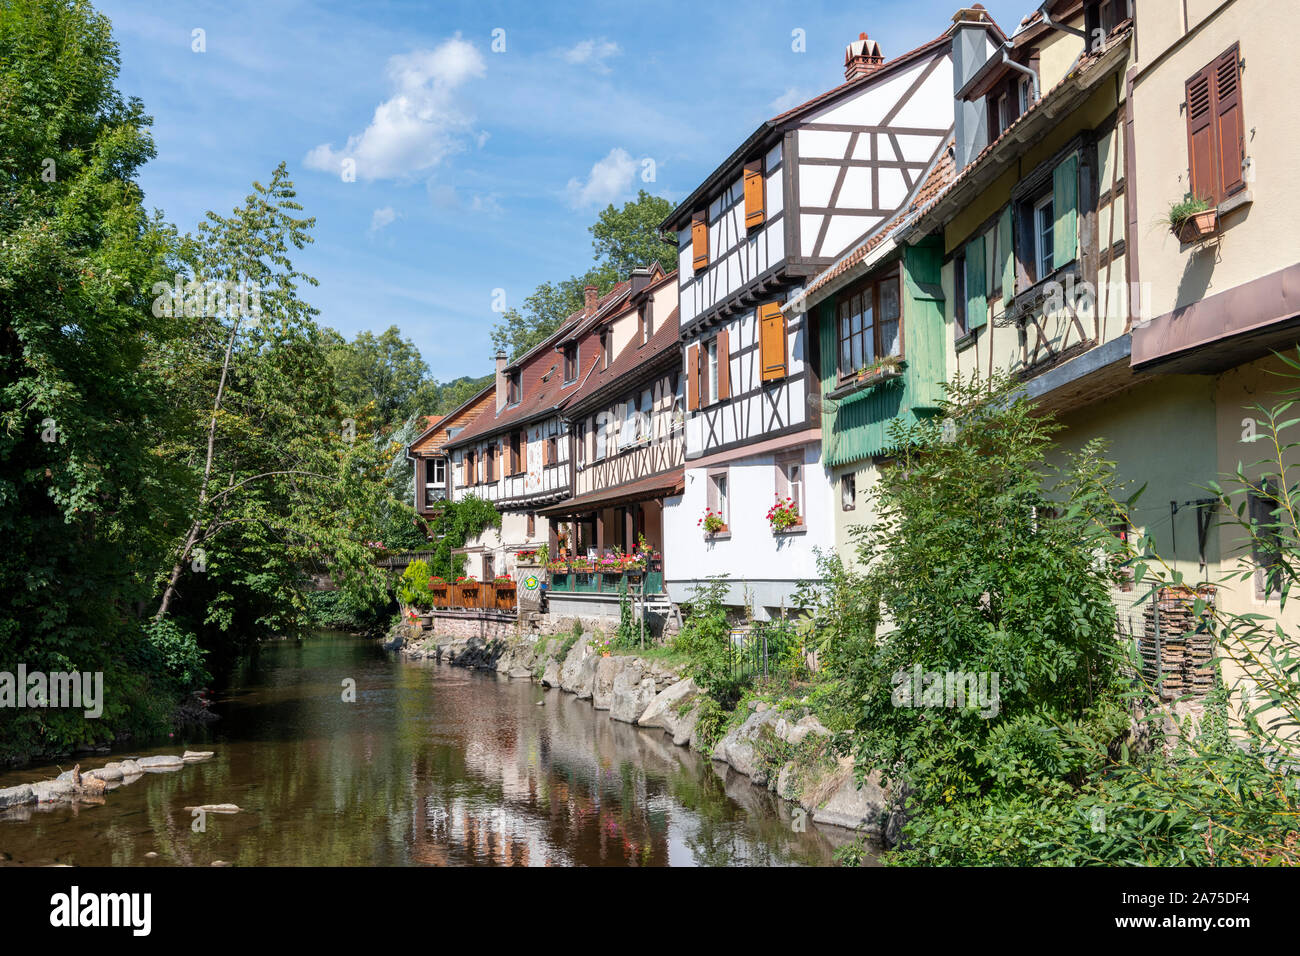 Old half timbered houses and buidlings in the medieval town of Kayserberg on the River Weiss, Alsace France Stock Photo